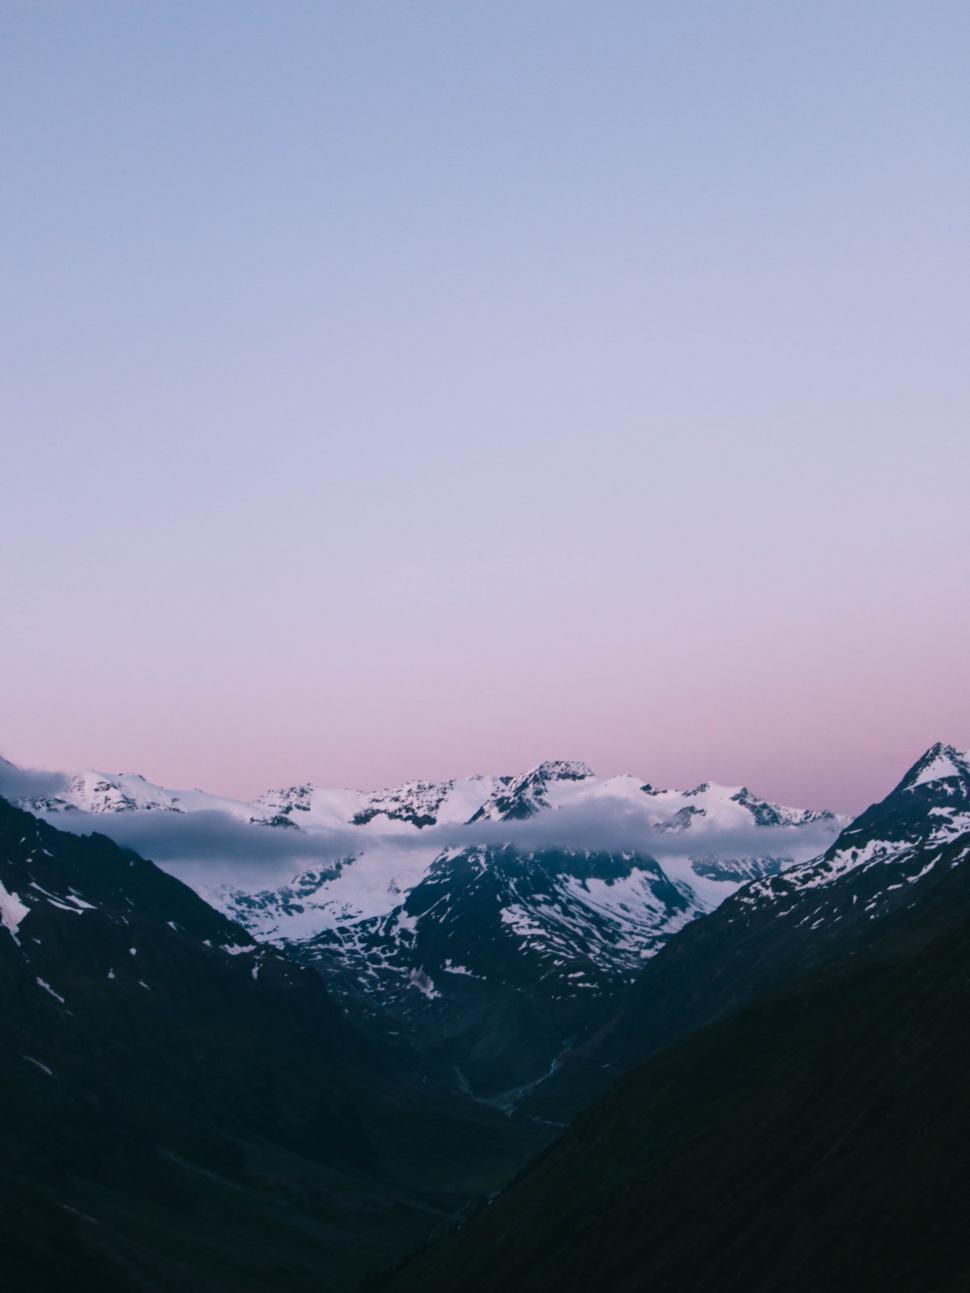 Free Image of Majestic Mountain Range Under a Pink Sky 